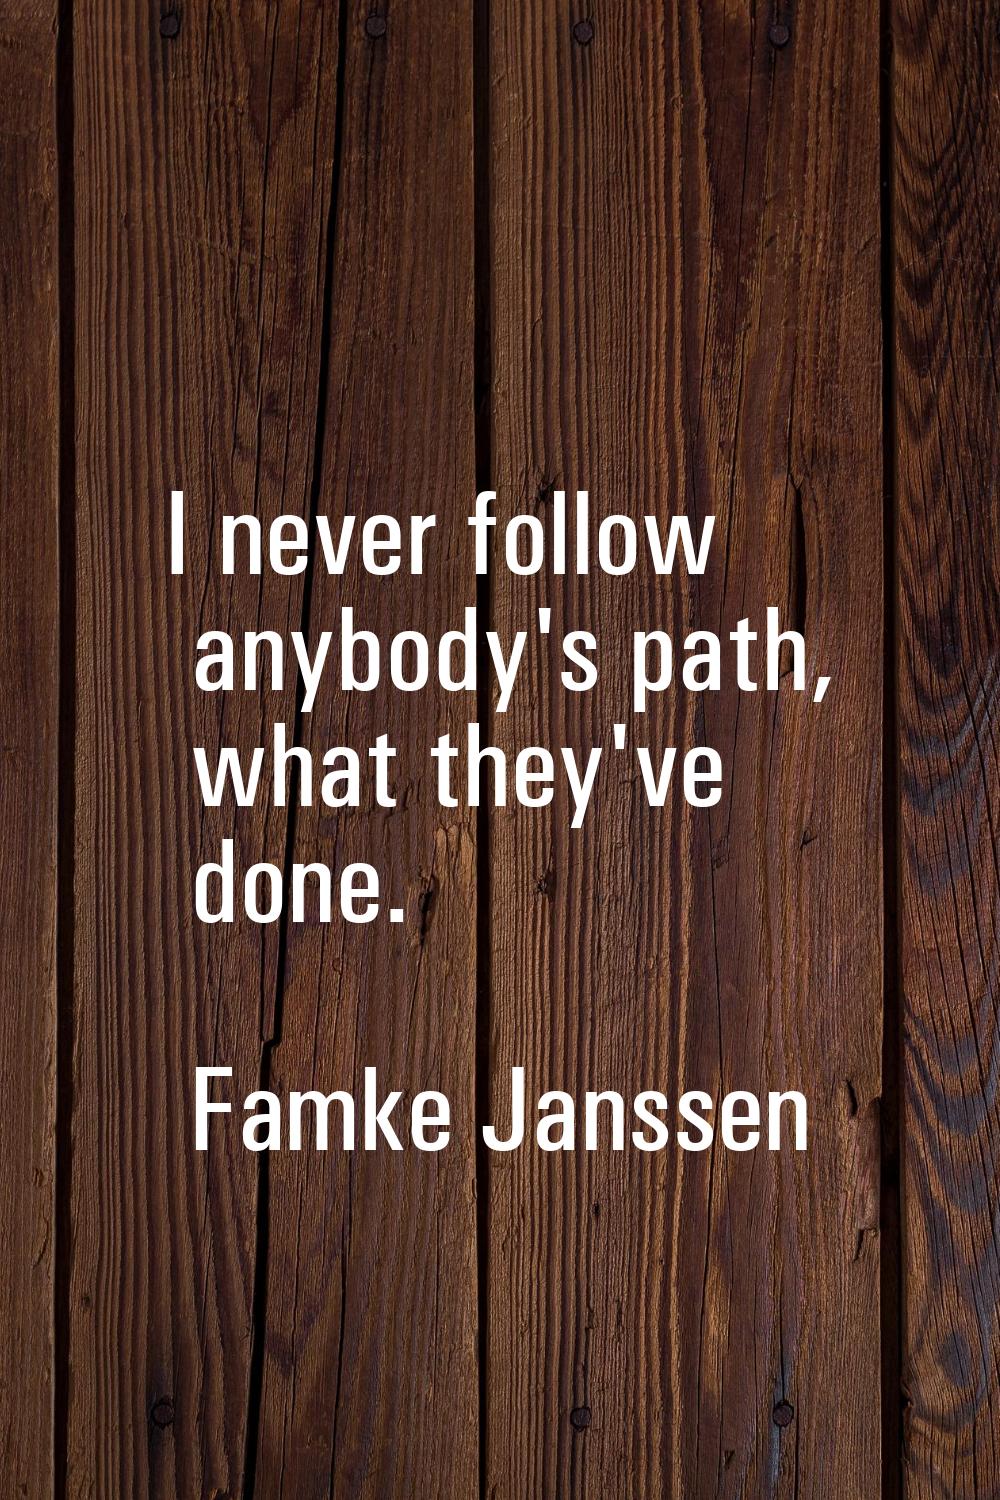 I never follow anybody's path, what they've done.